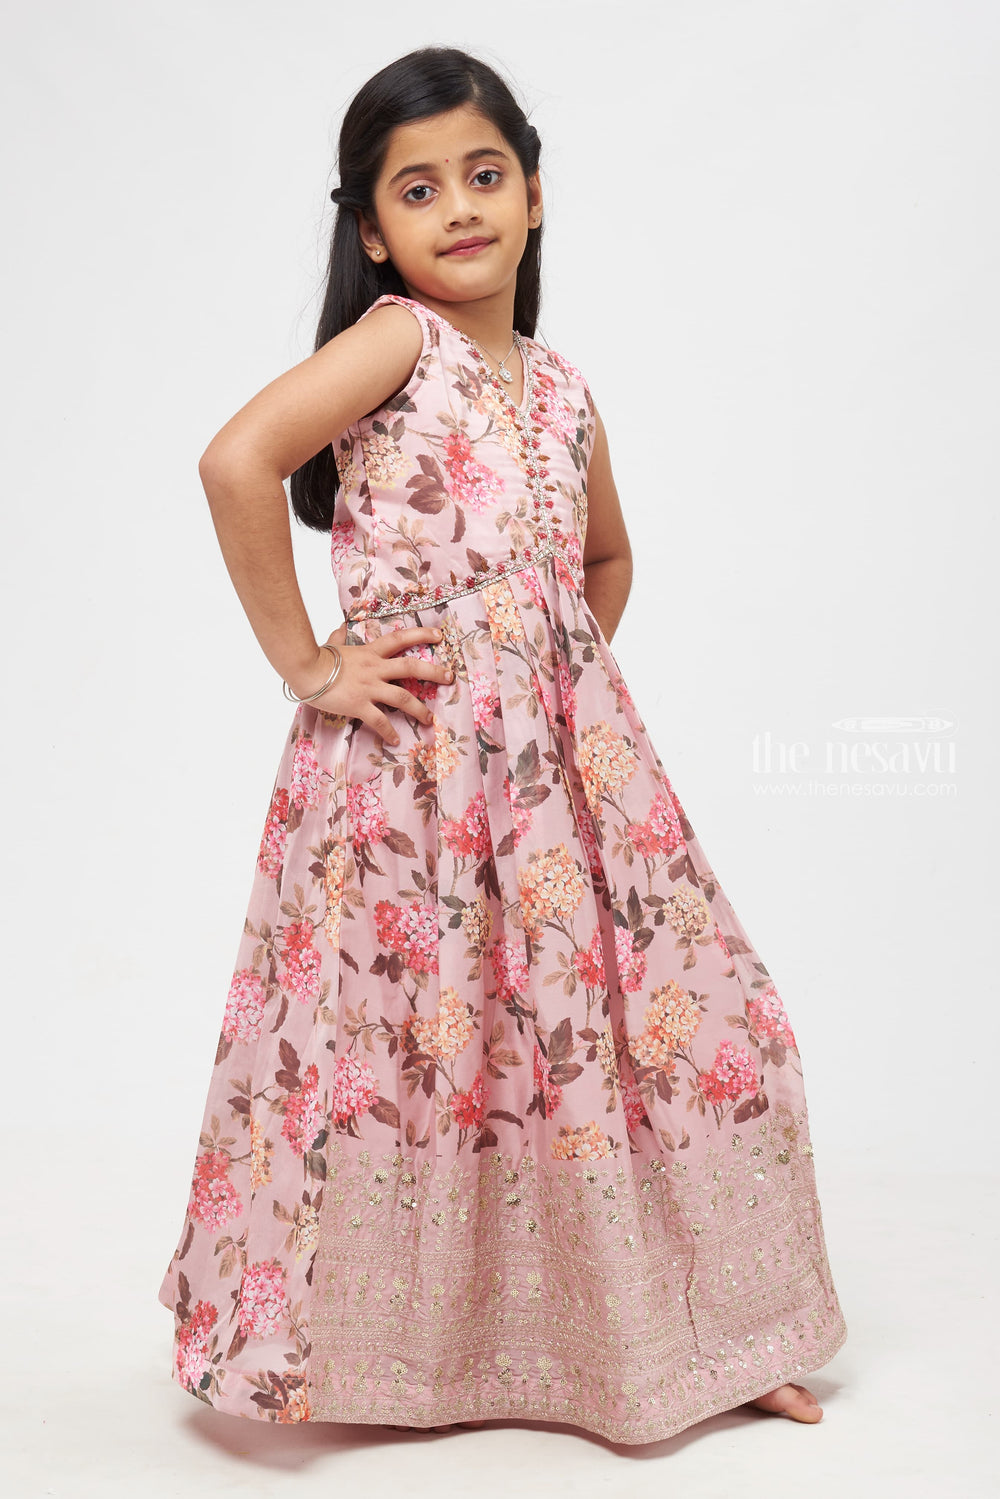 The Nesavu Girls Party Gown Delicate Blossom Diwali Gown with Shimmering Silver Detailing Anarkali for Girls Nesavu Girls Delicate Blossom Gown | Diwali Shimmer Collection | Floral Festive Dress | The Nesavu